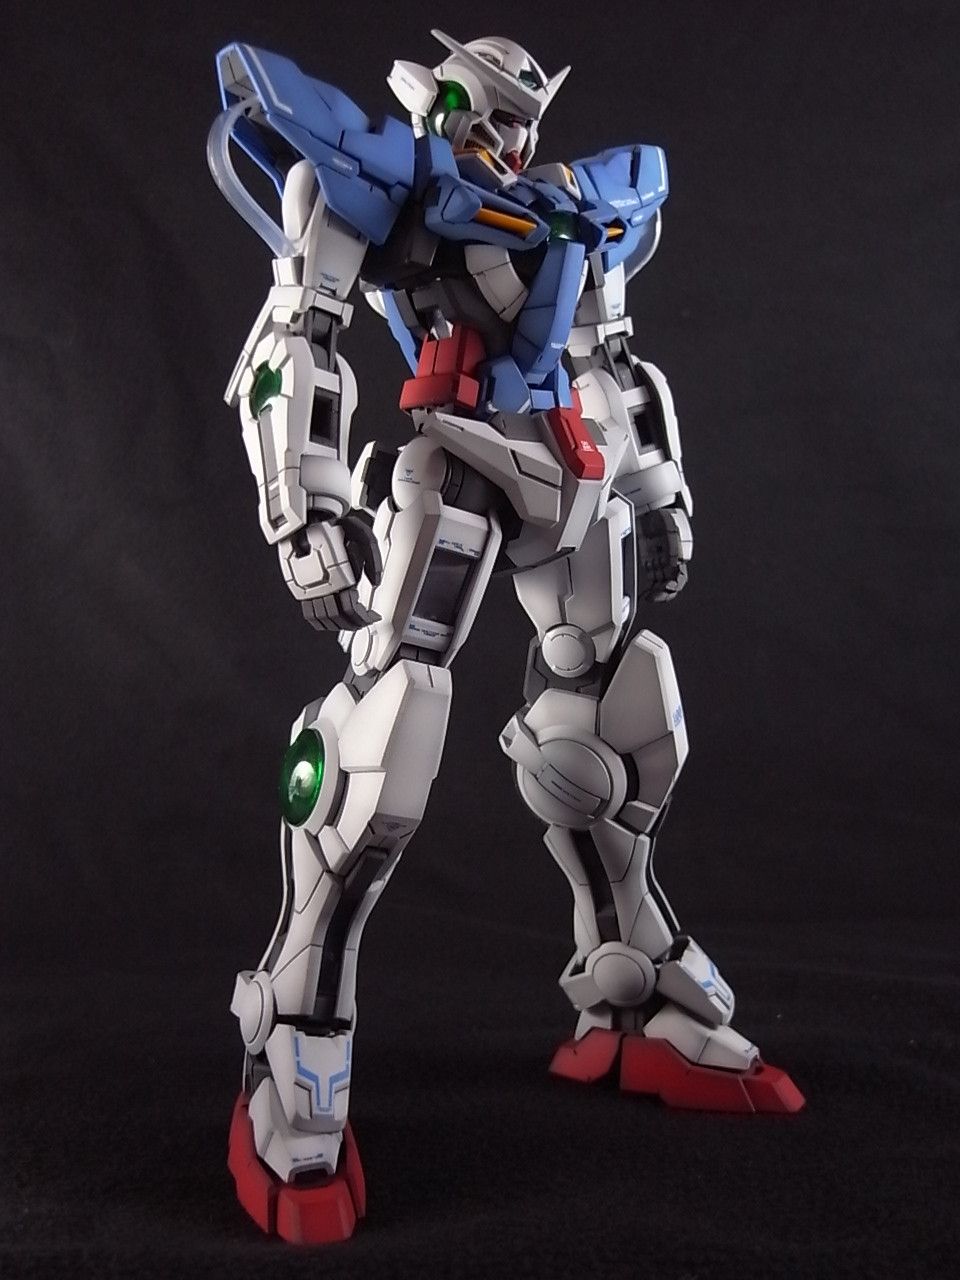 MG 1 / 100 Gundam Exia Modeled by Lucier. Photoreview Wallpaper